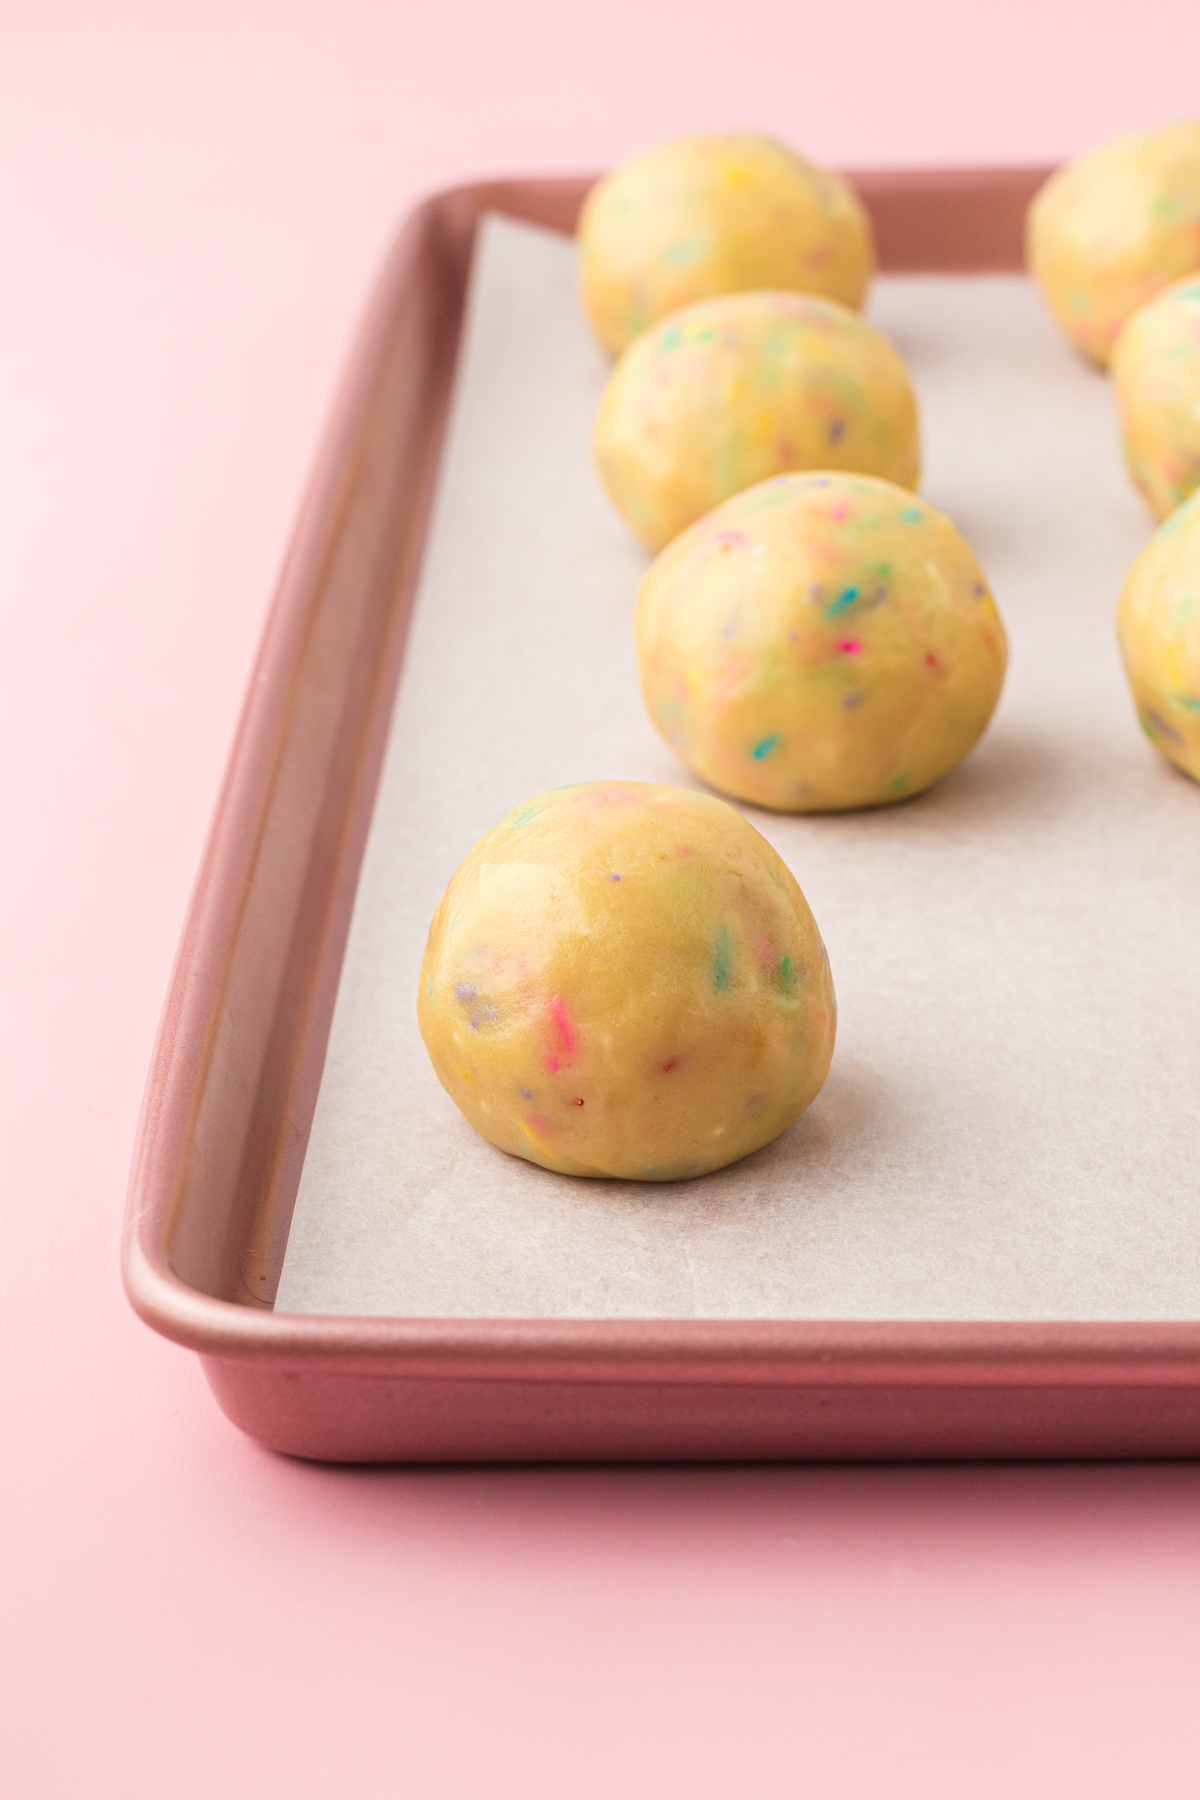 unbaked Lucky Charms cookie dough balls on a baking sheet